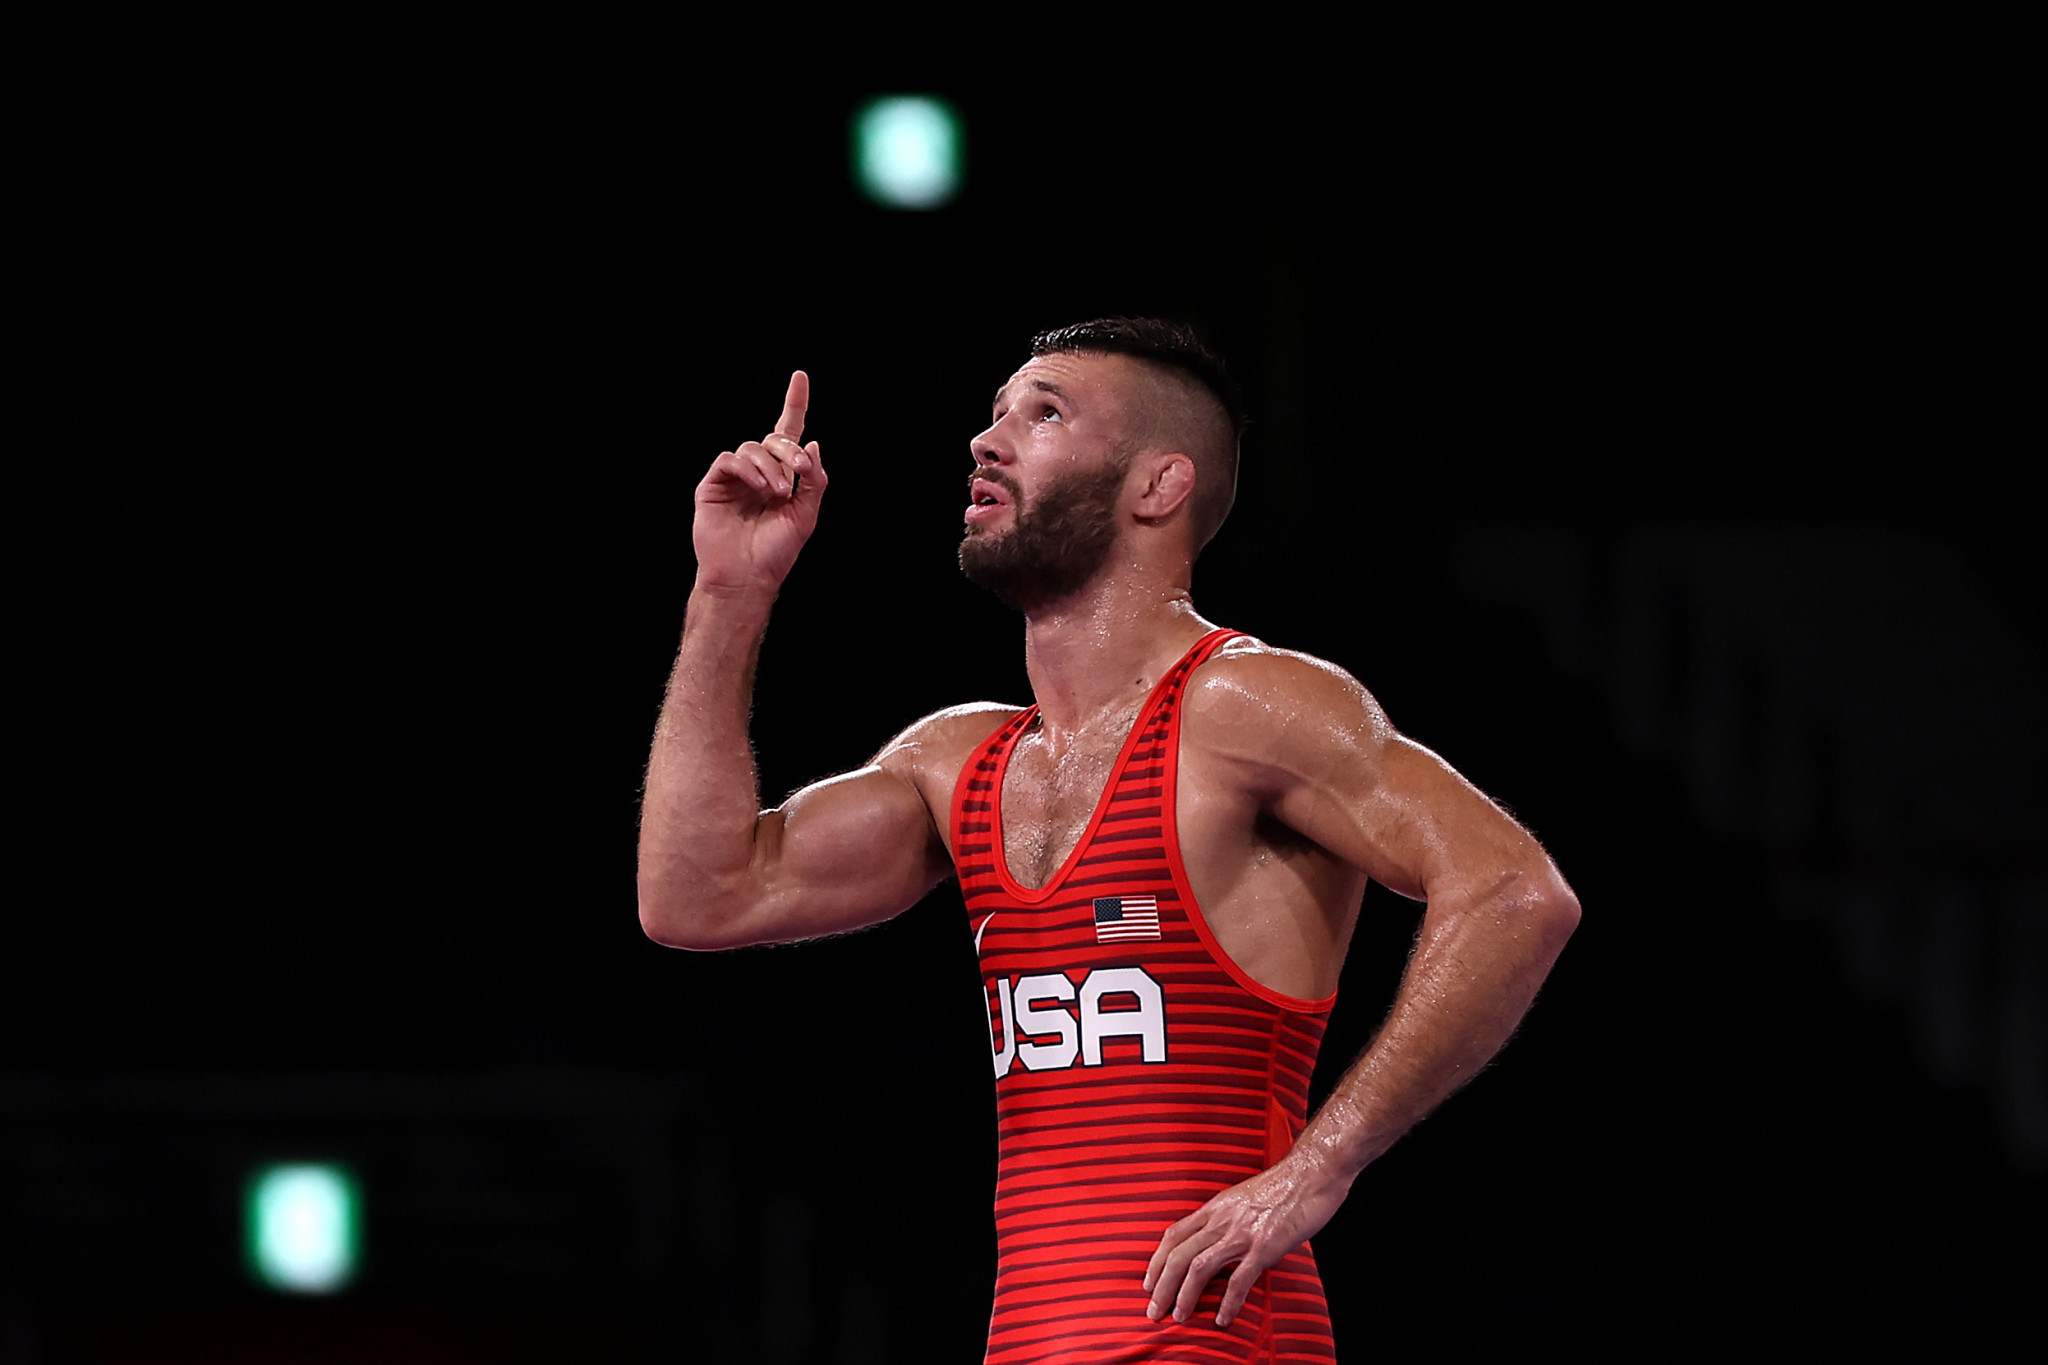 US wrestlers aim to continue domination at Pan American Championships in Acapulco 